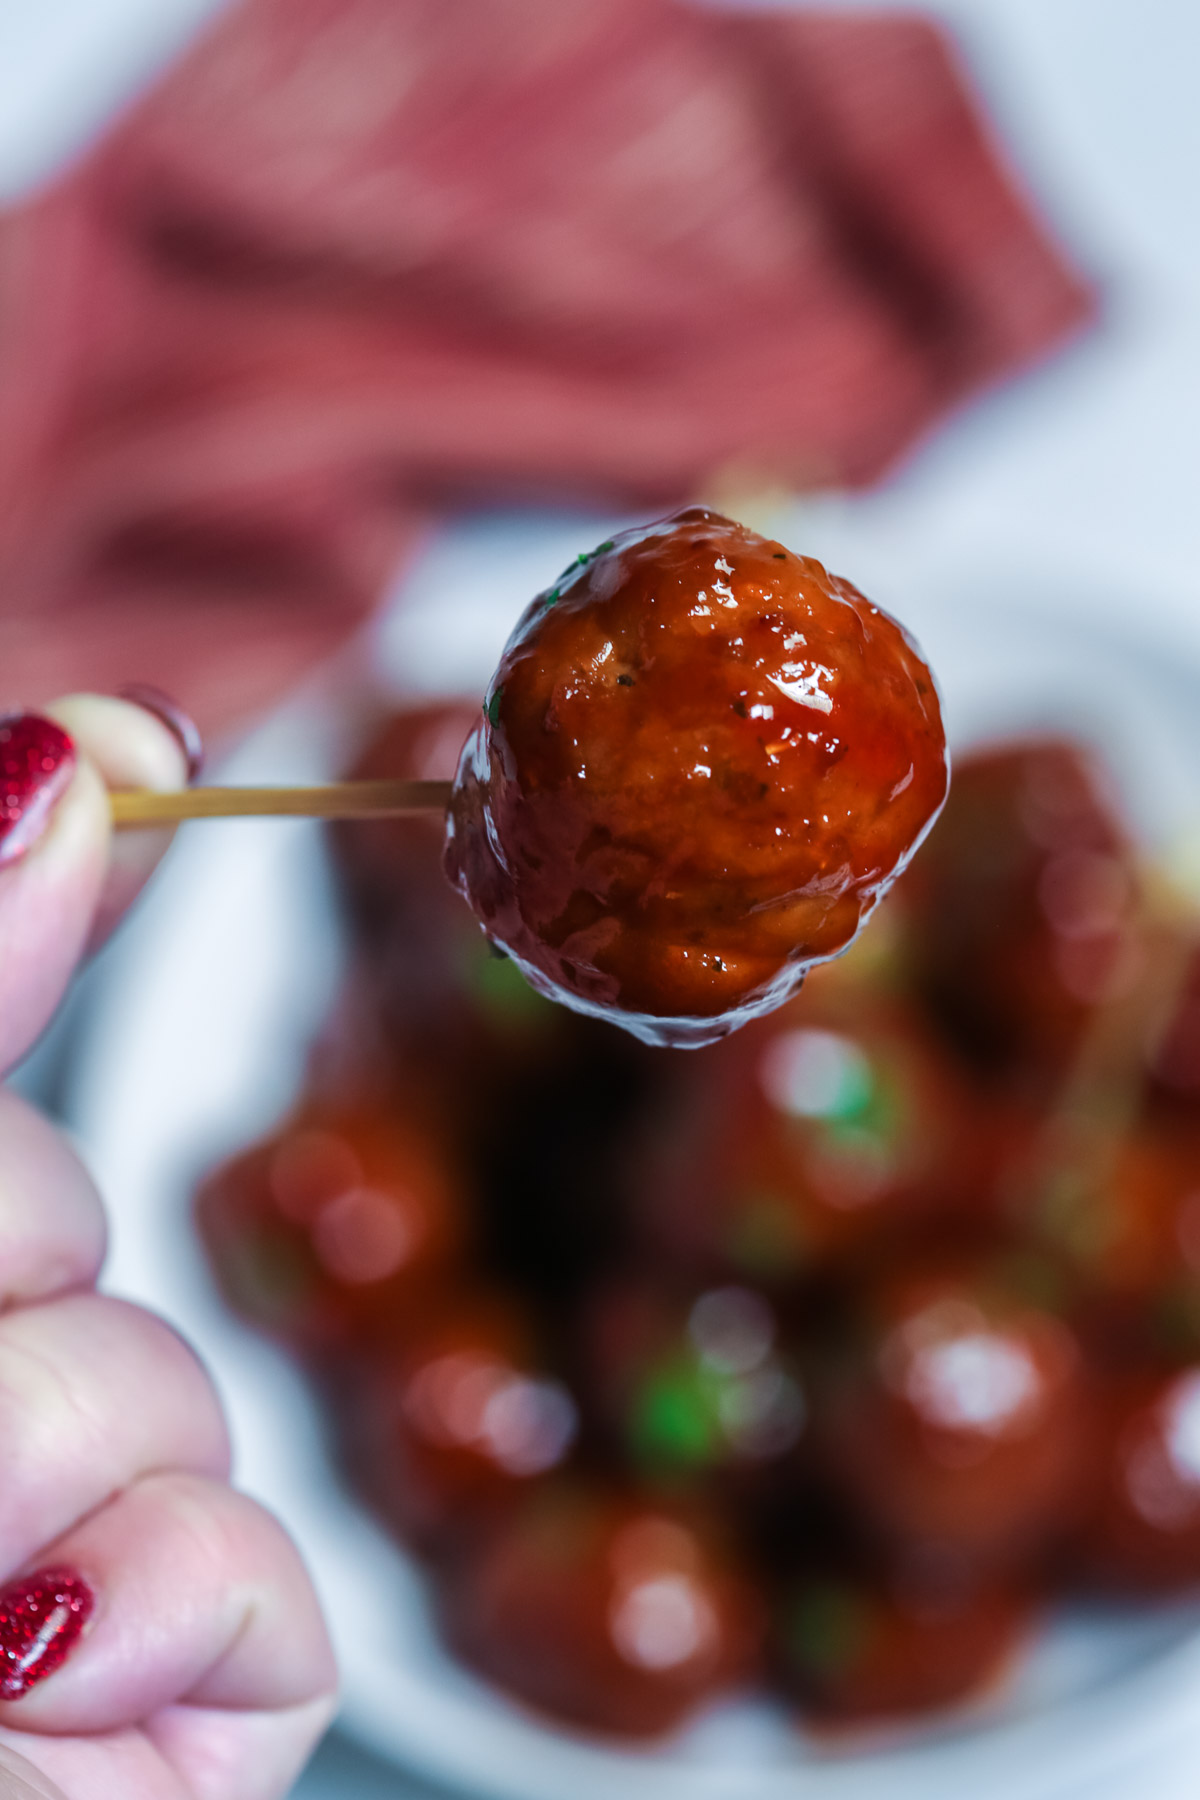 A person holding a barbecue and grape jelly meatball on a toothpick.